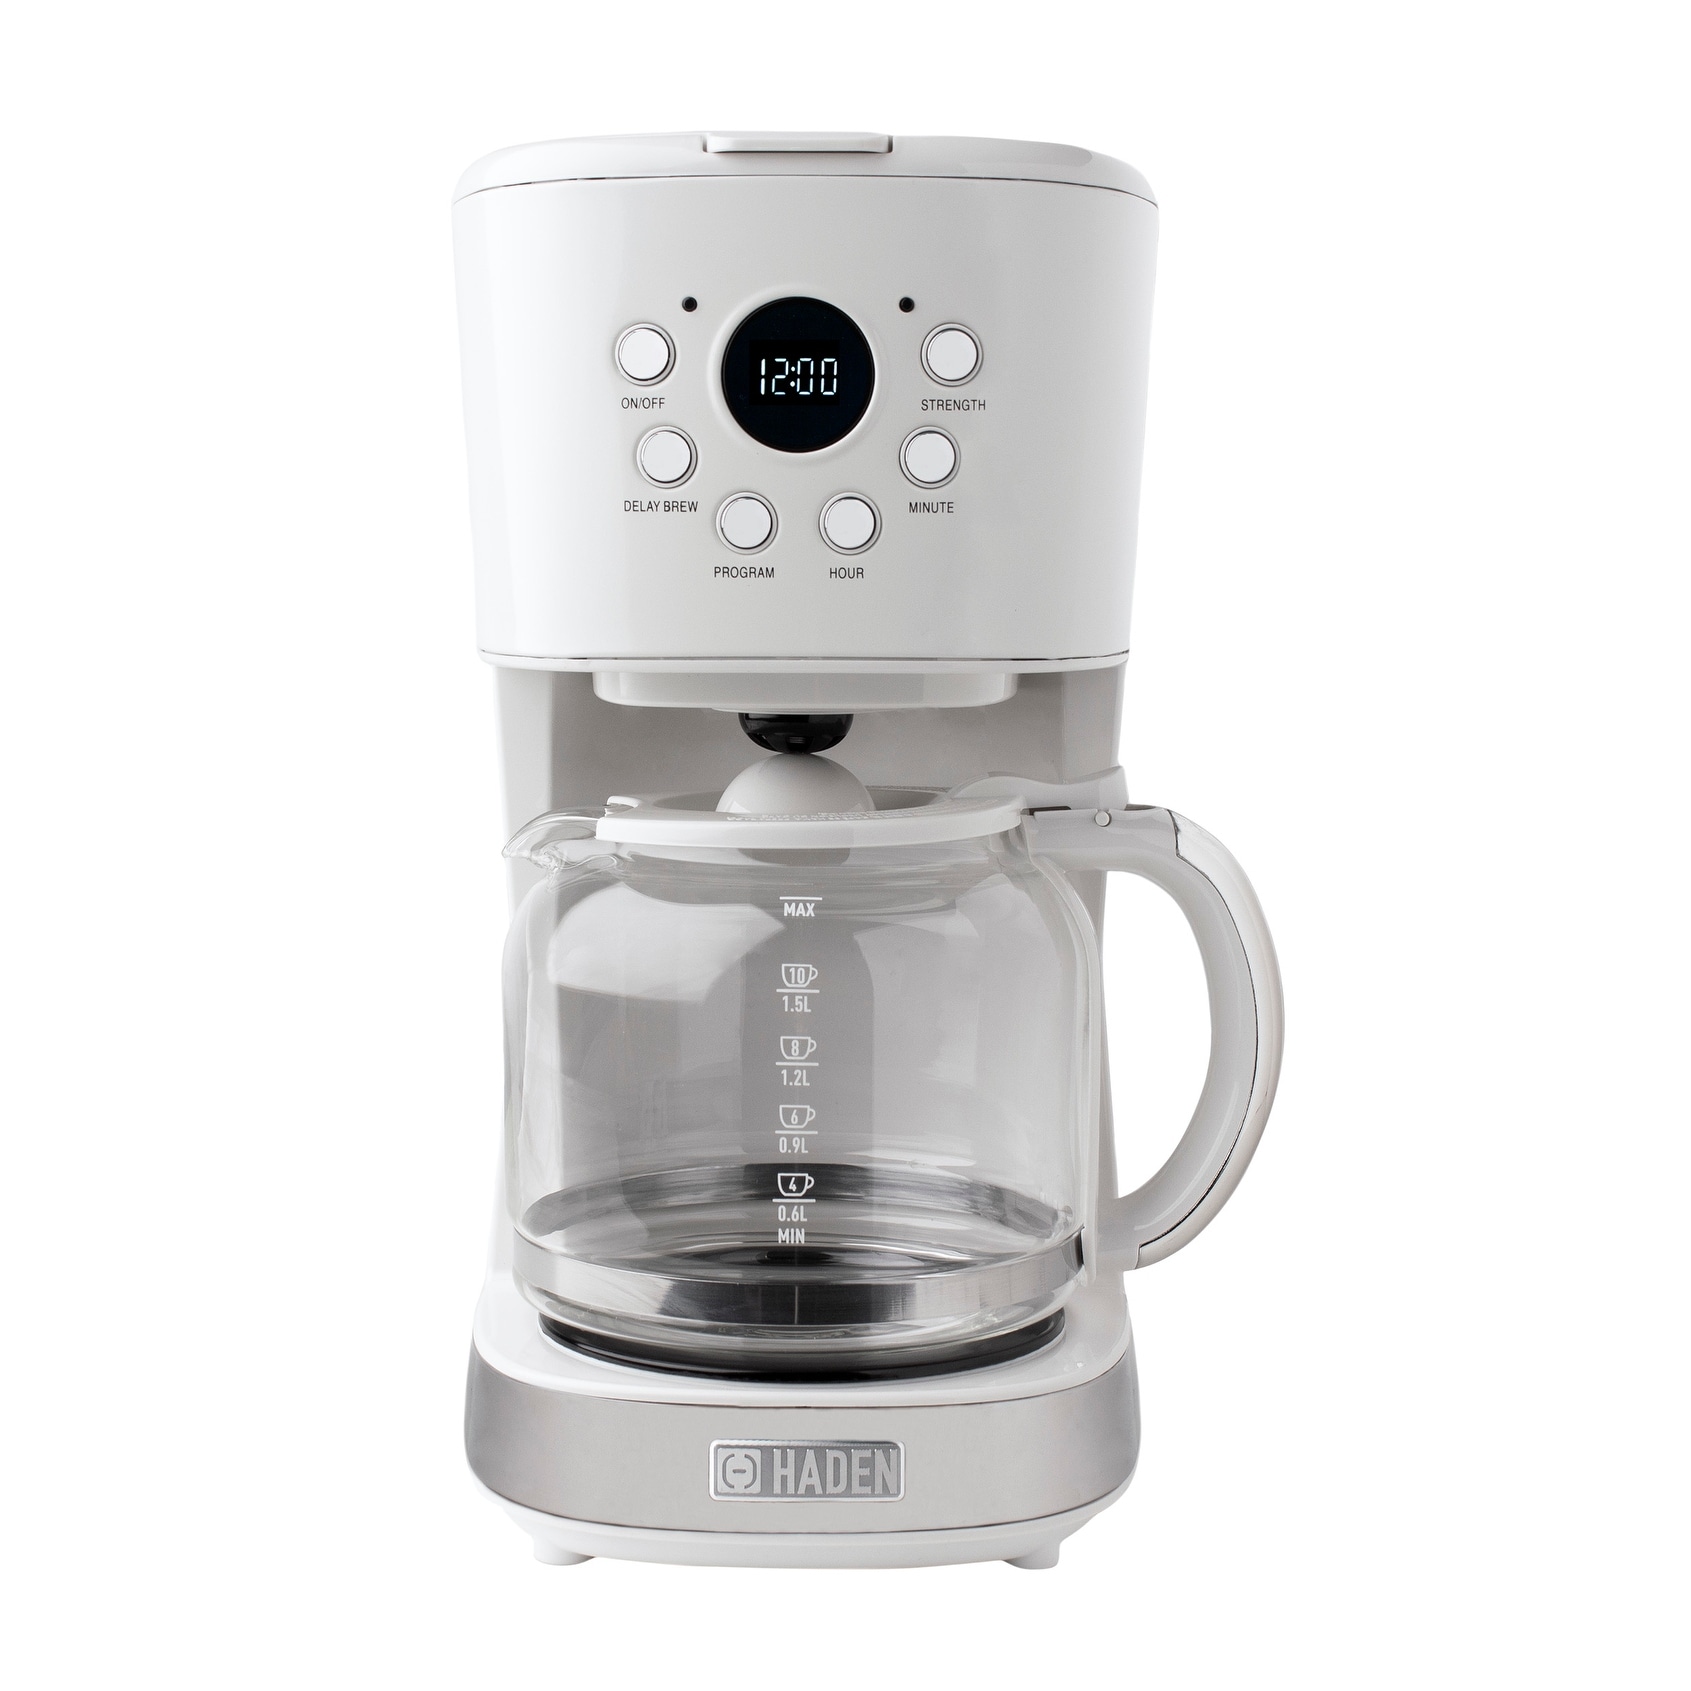 https://ak1.ostkcdn.com/images/products/is/images/direct/ef6fa09851fc3d9f67c0ba844a4a3c61c556863c/Haden-Dorset-12-Cup-Programmable-Coffee-Maker-with-Strength-Control-in-Putty-Beige.jpg